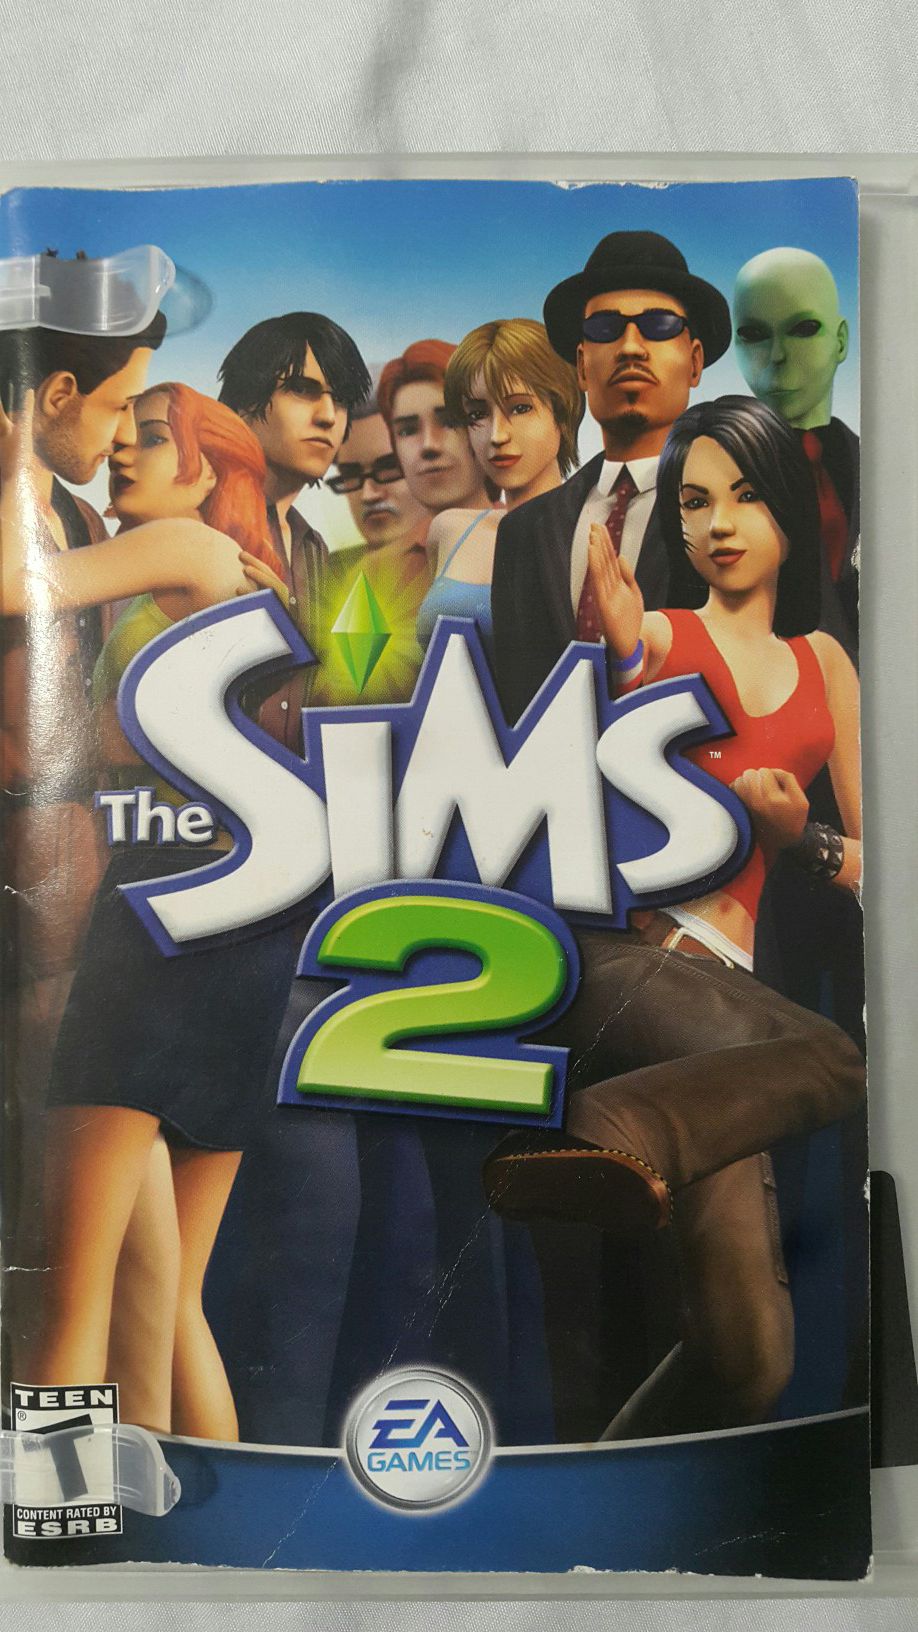 THE SIMS 2 COMPUTER SOFTWARE